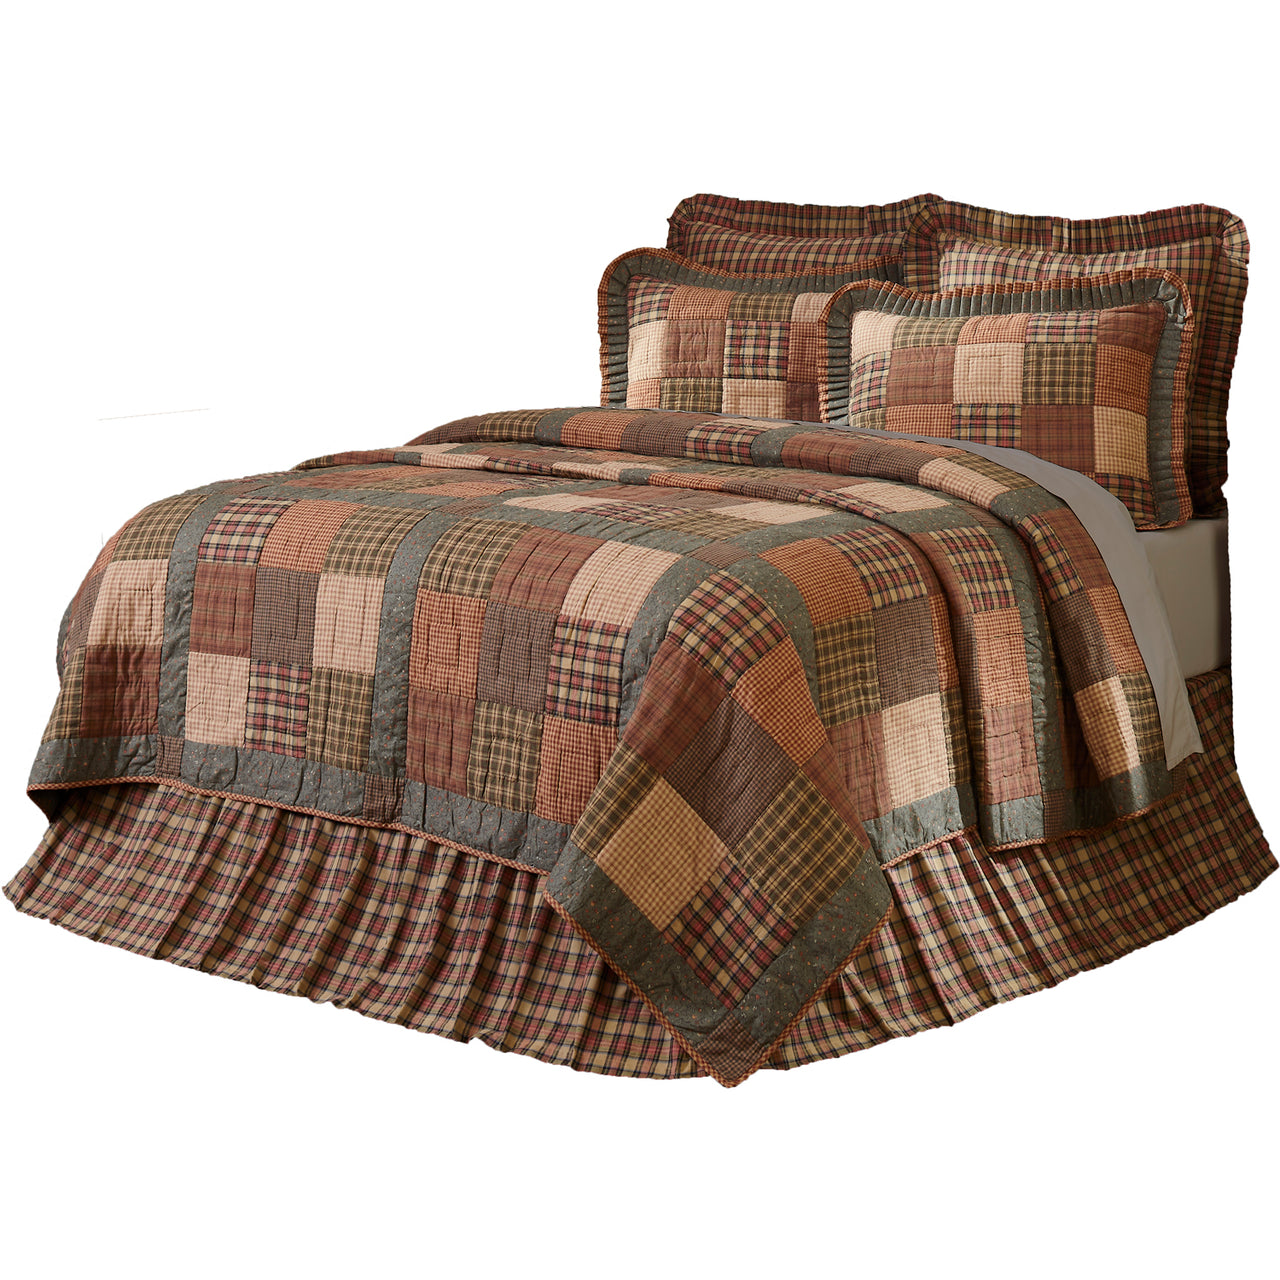 Crosswoods California King Quilt 130Wx115L VHC Brands